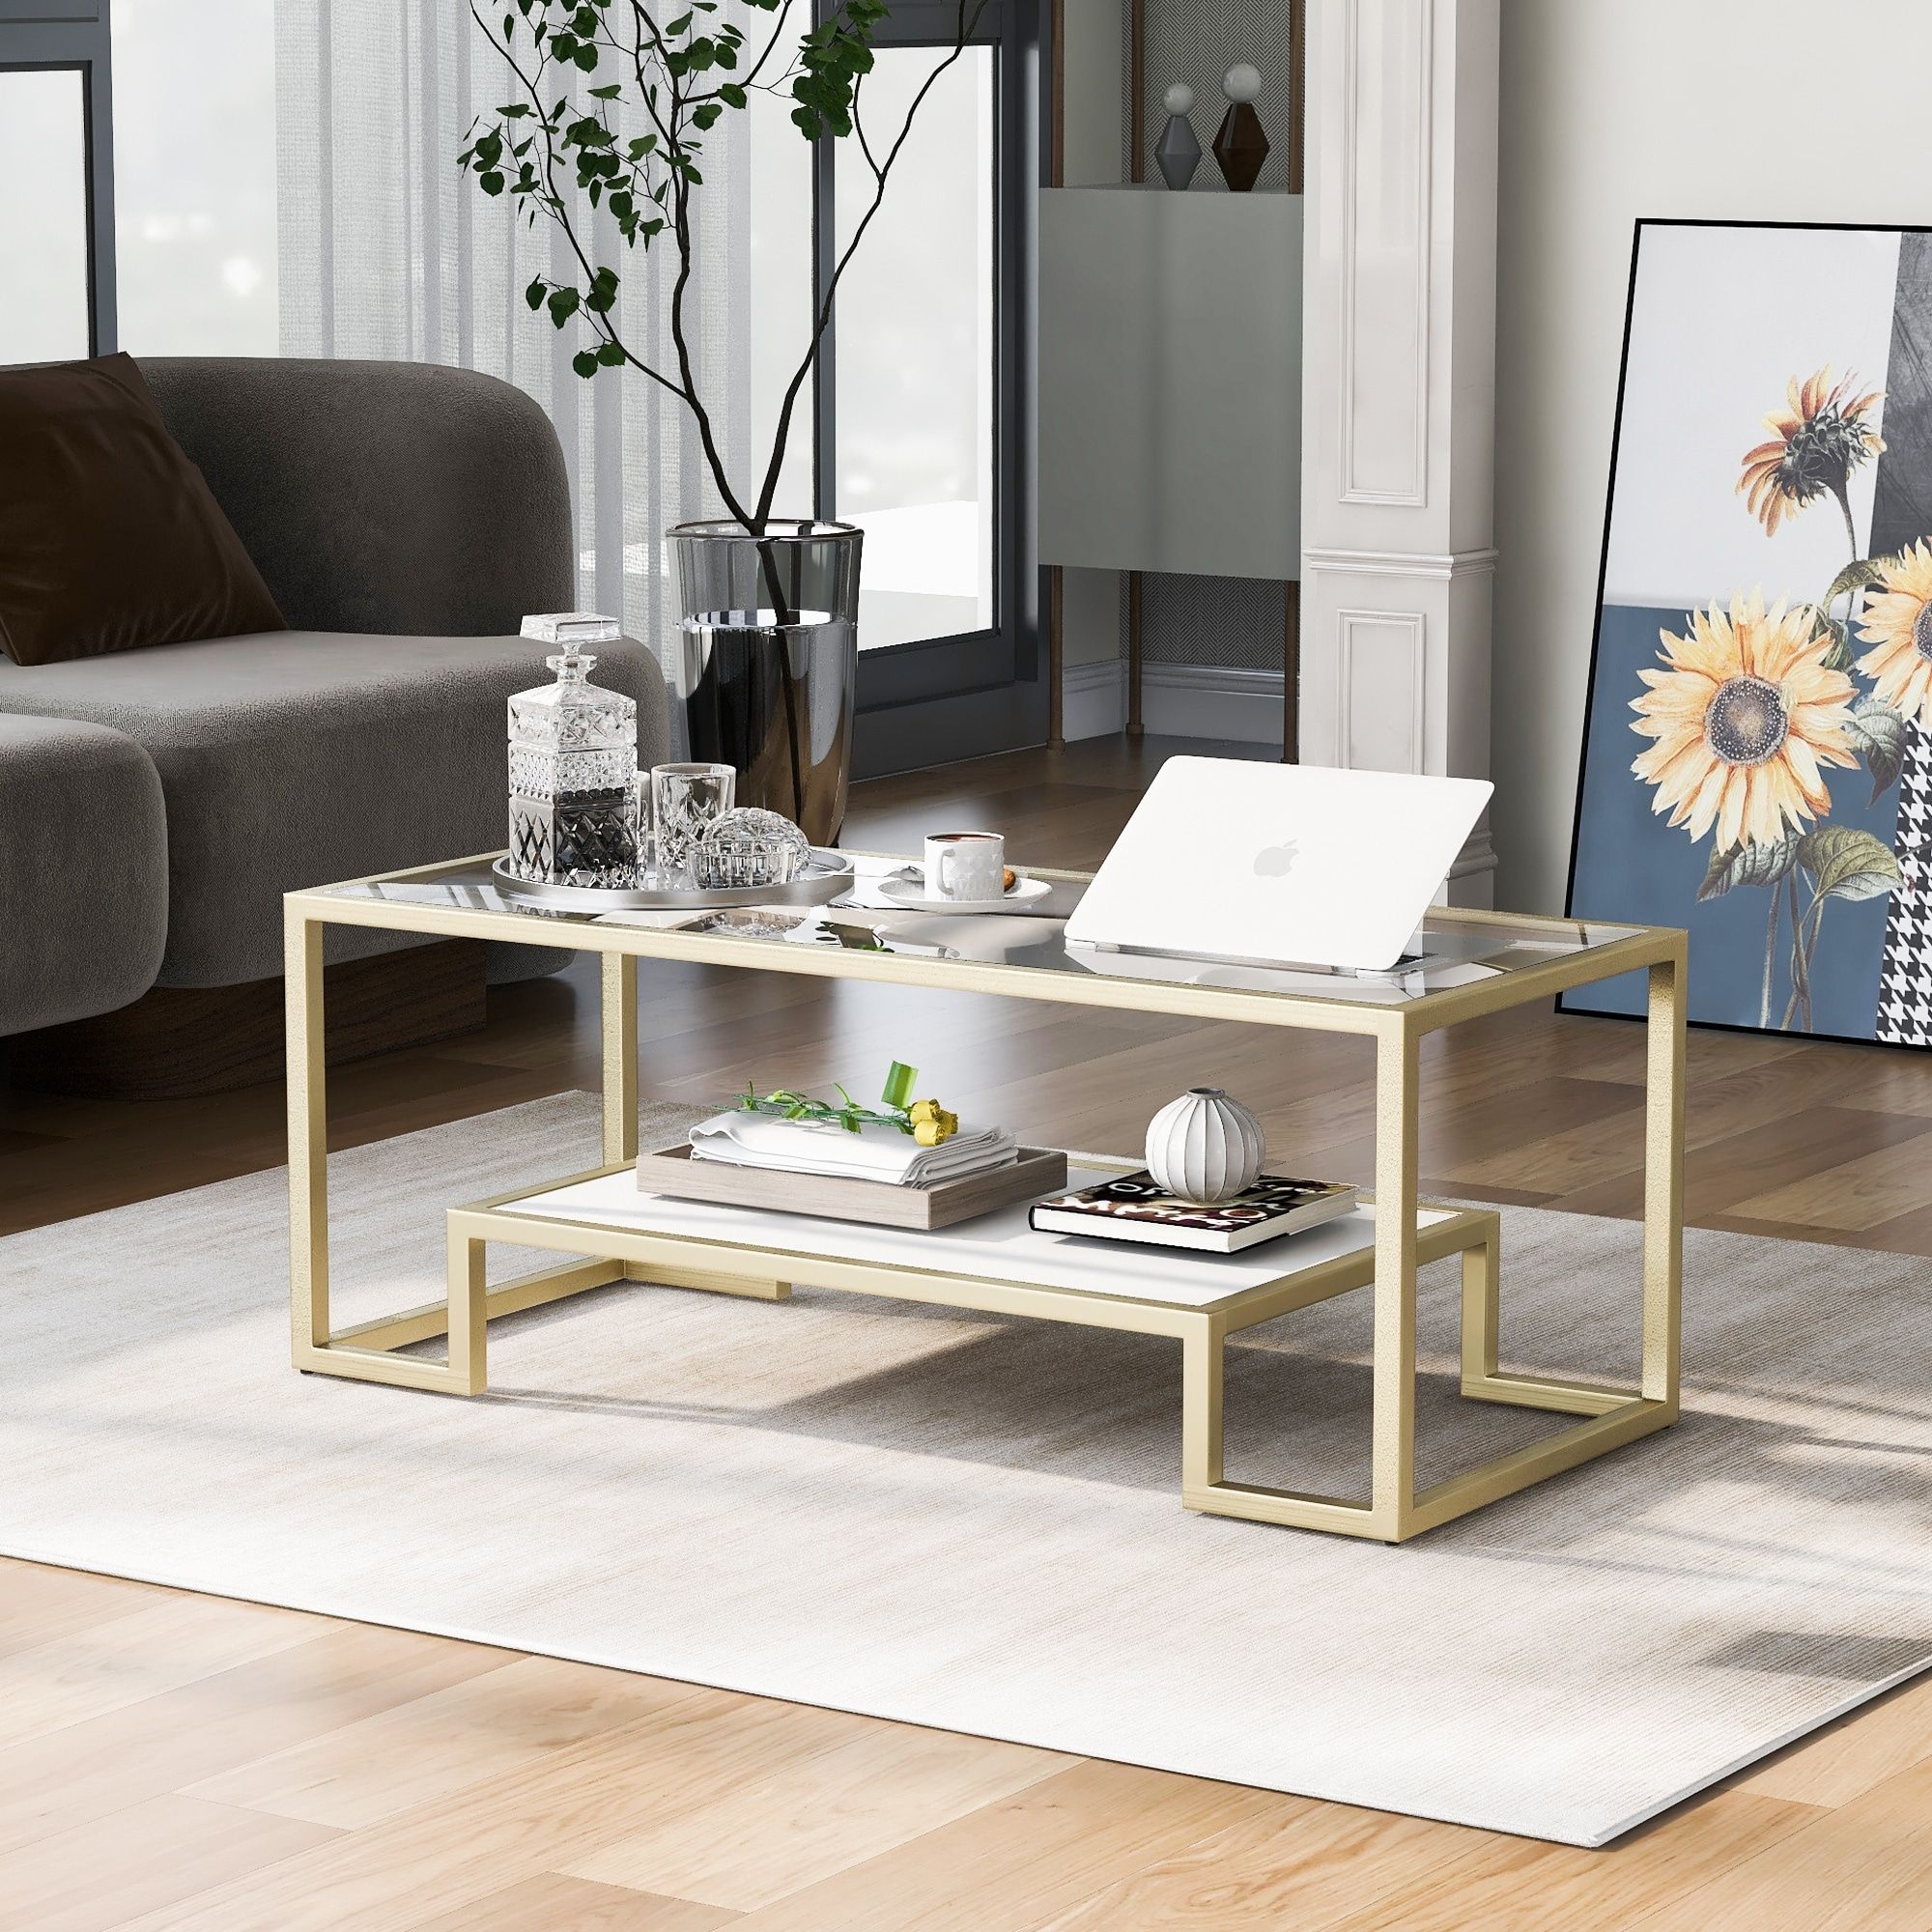 2 Tier Cocktail Tables Living Room Tempered Glass Coffee Table – Overstock  – 35464868 Regarding 2 Tier Metal Coffee Tables (View 1 of 20)